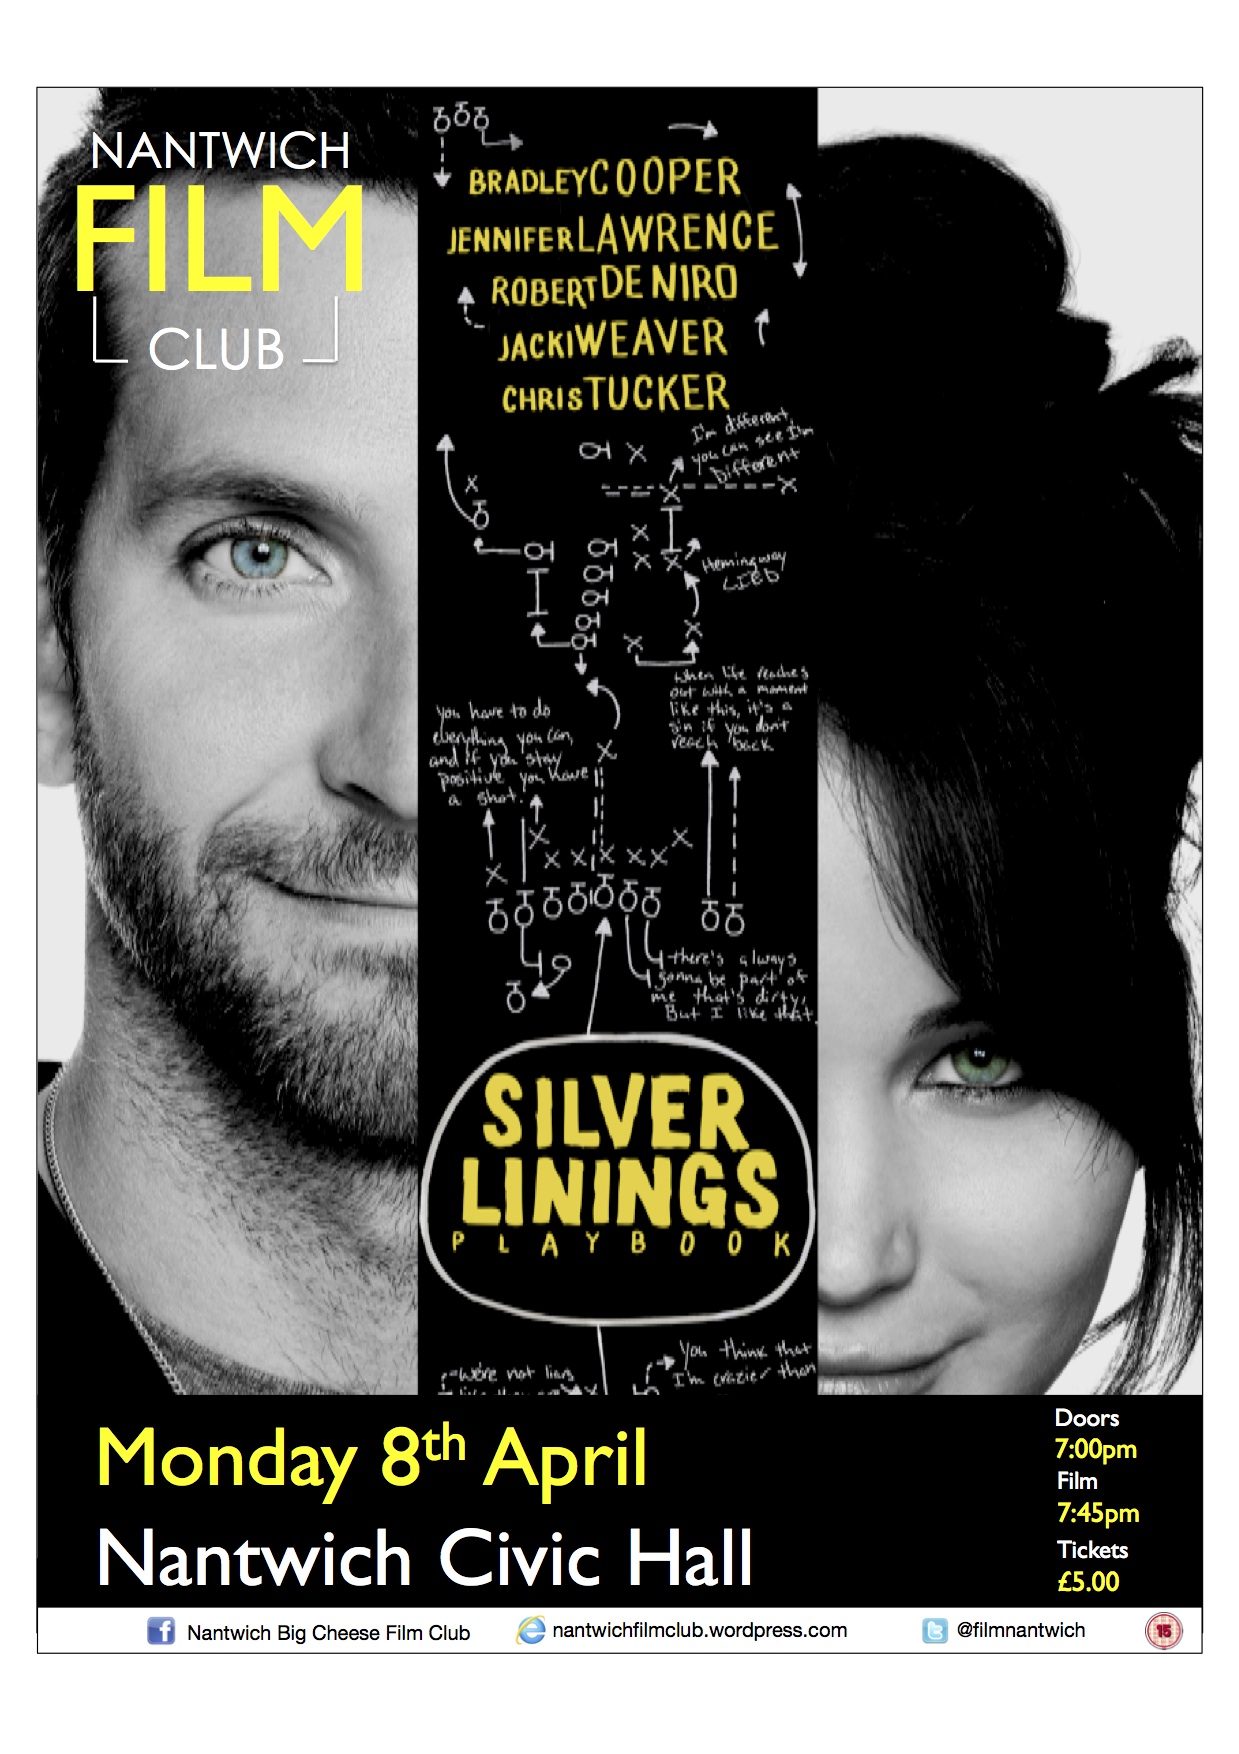 Silver Linings Playbook - Nantwich Civic Hall - Monday 8th April